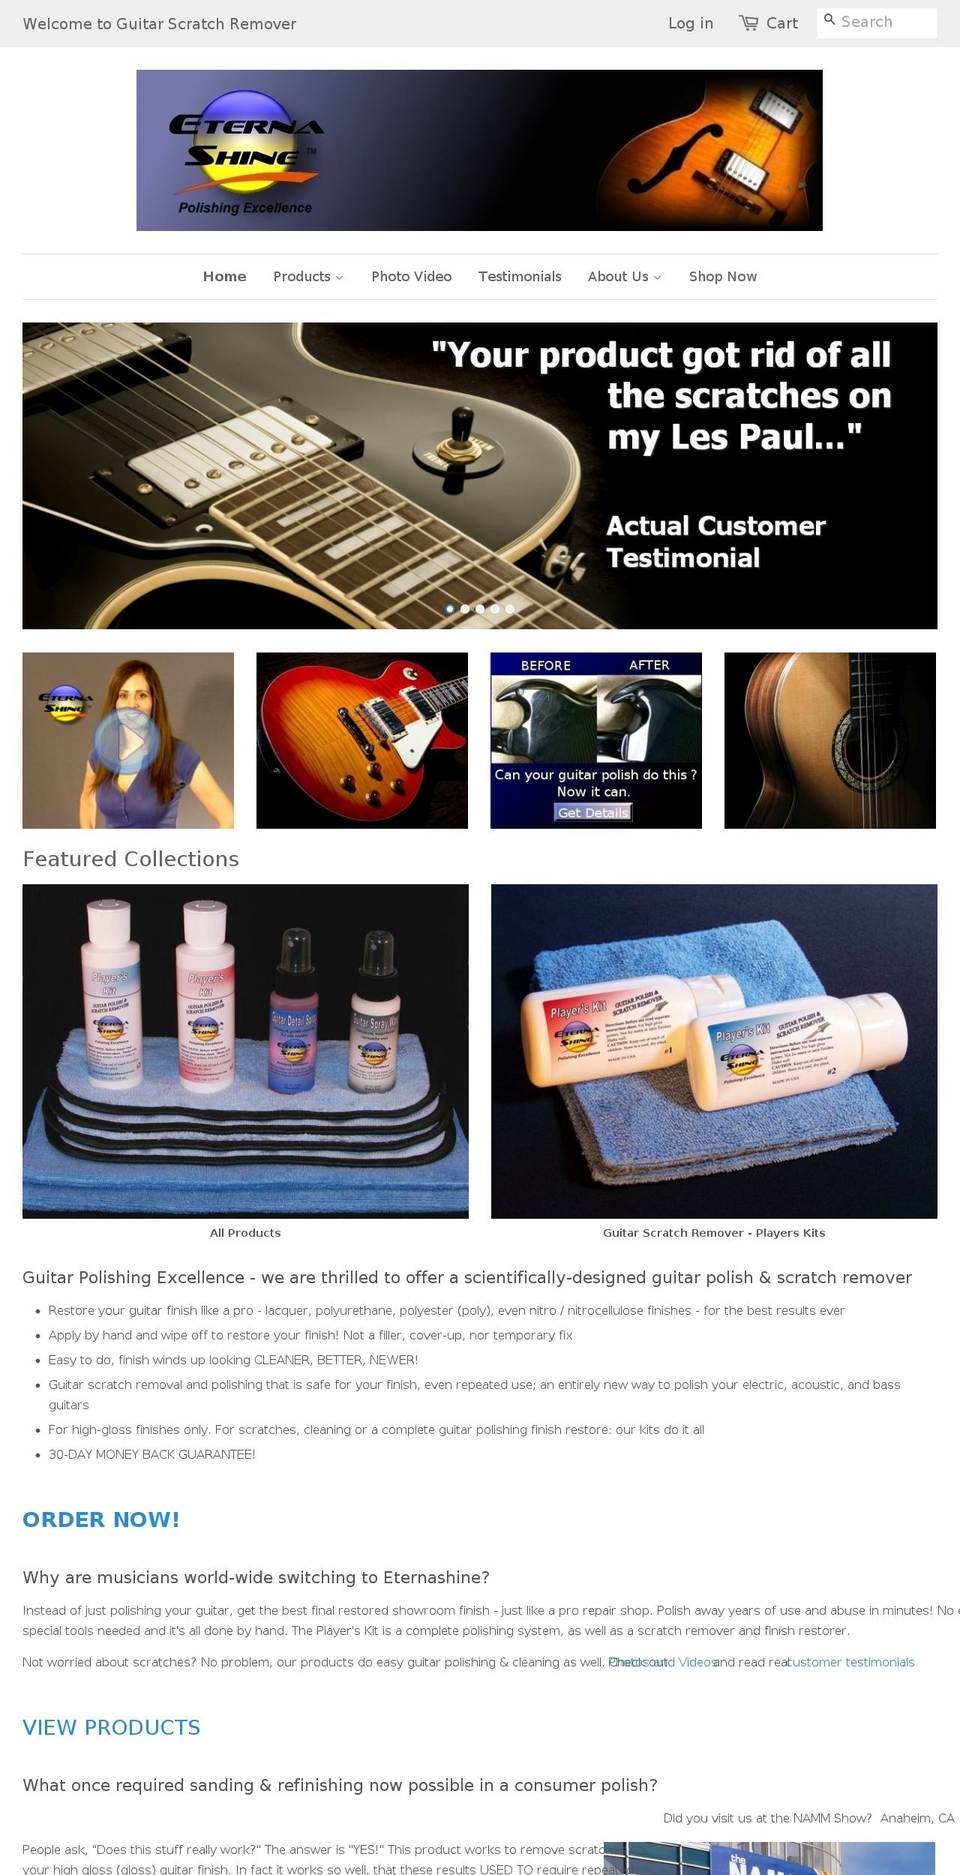 Copy of Minimal Shopify theme site example guitarscratchremover.net